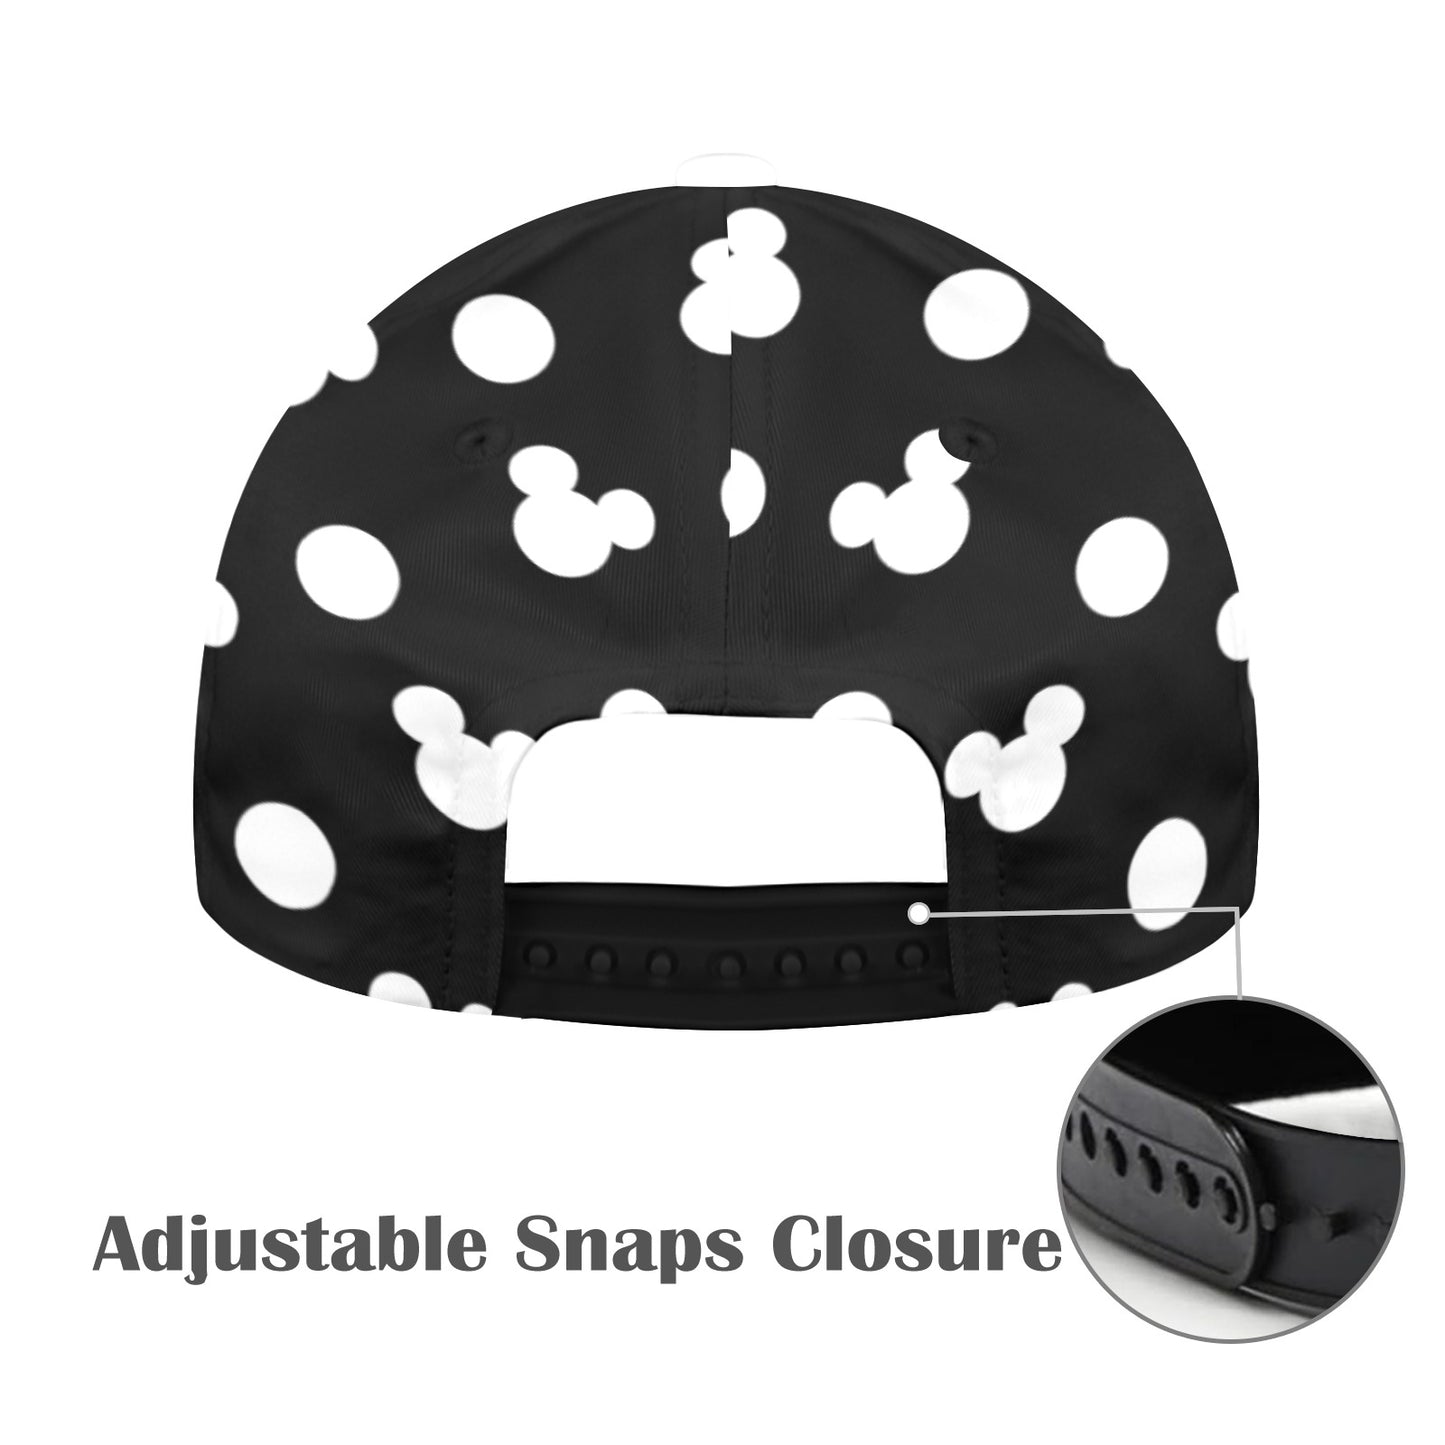 Black With White Mickey Polka Dots Hat